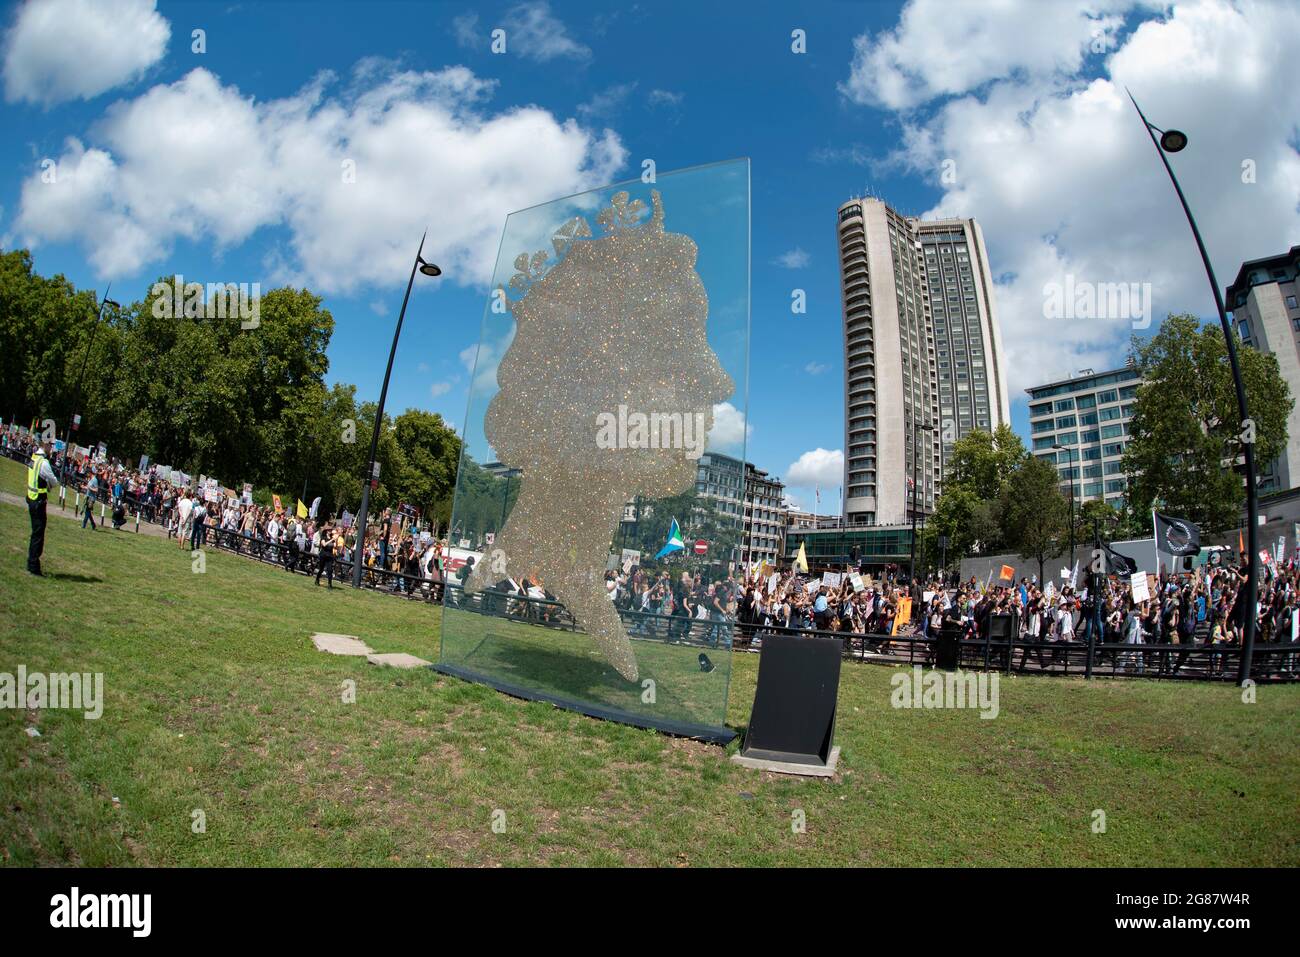 One Million Queen Sculpture with animal rights protesters marching behind Stock Photo